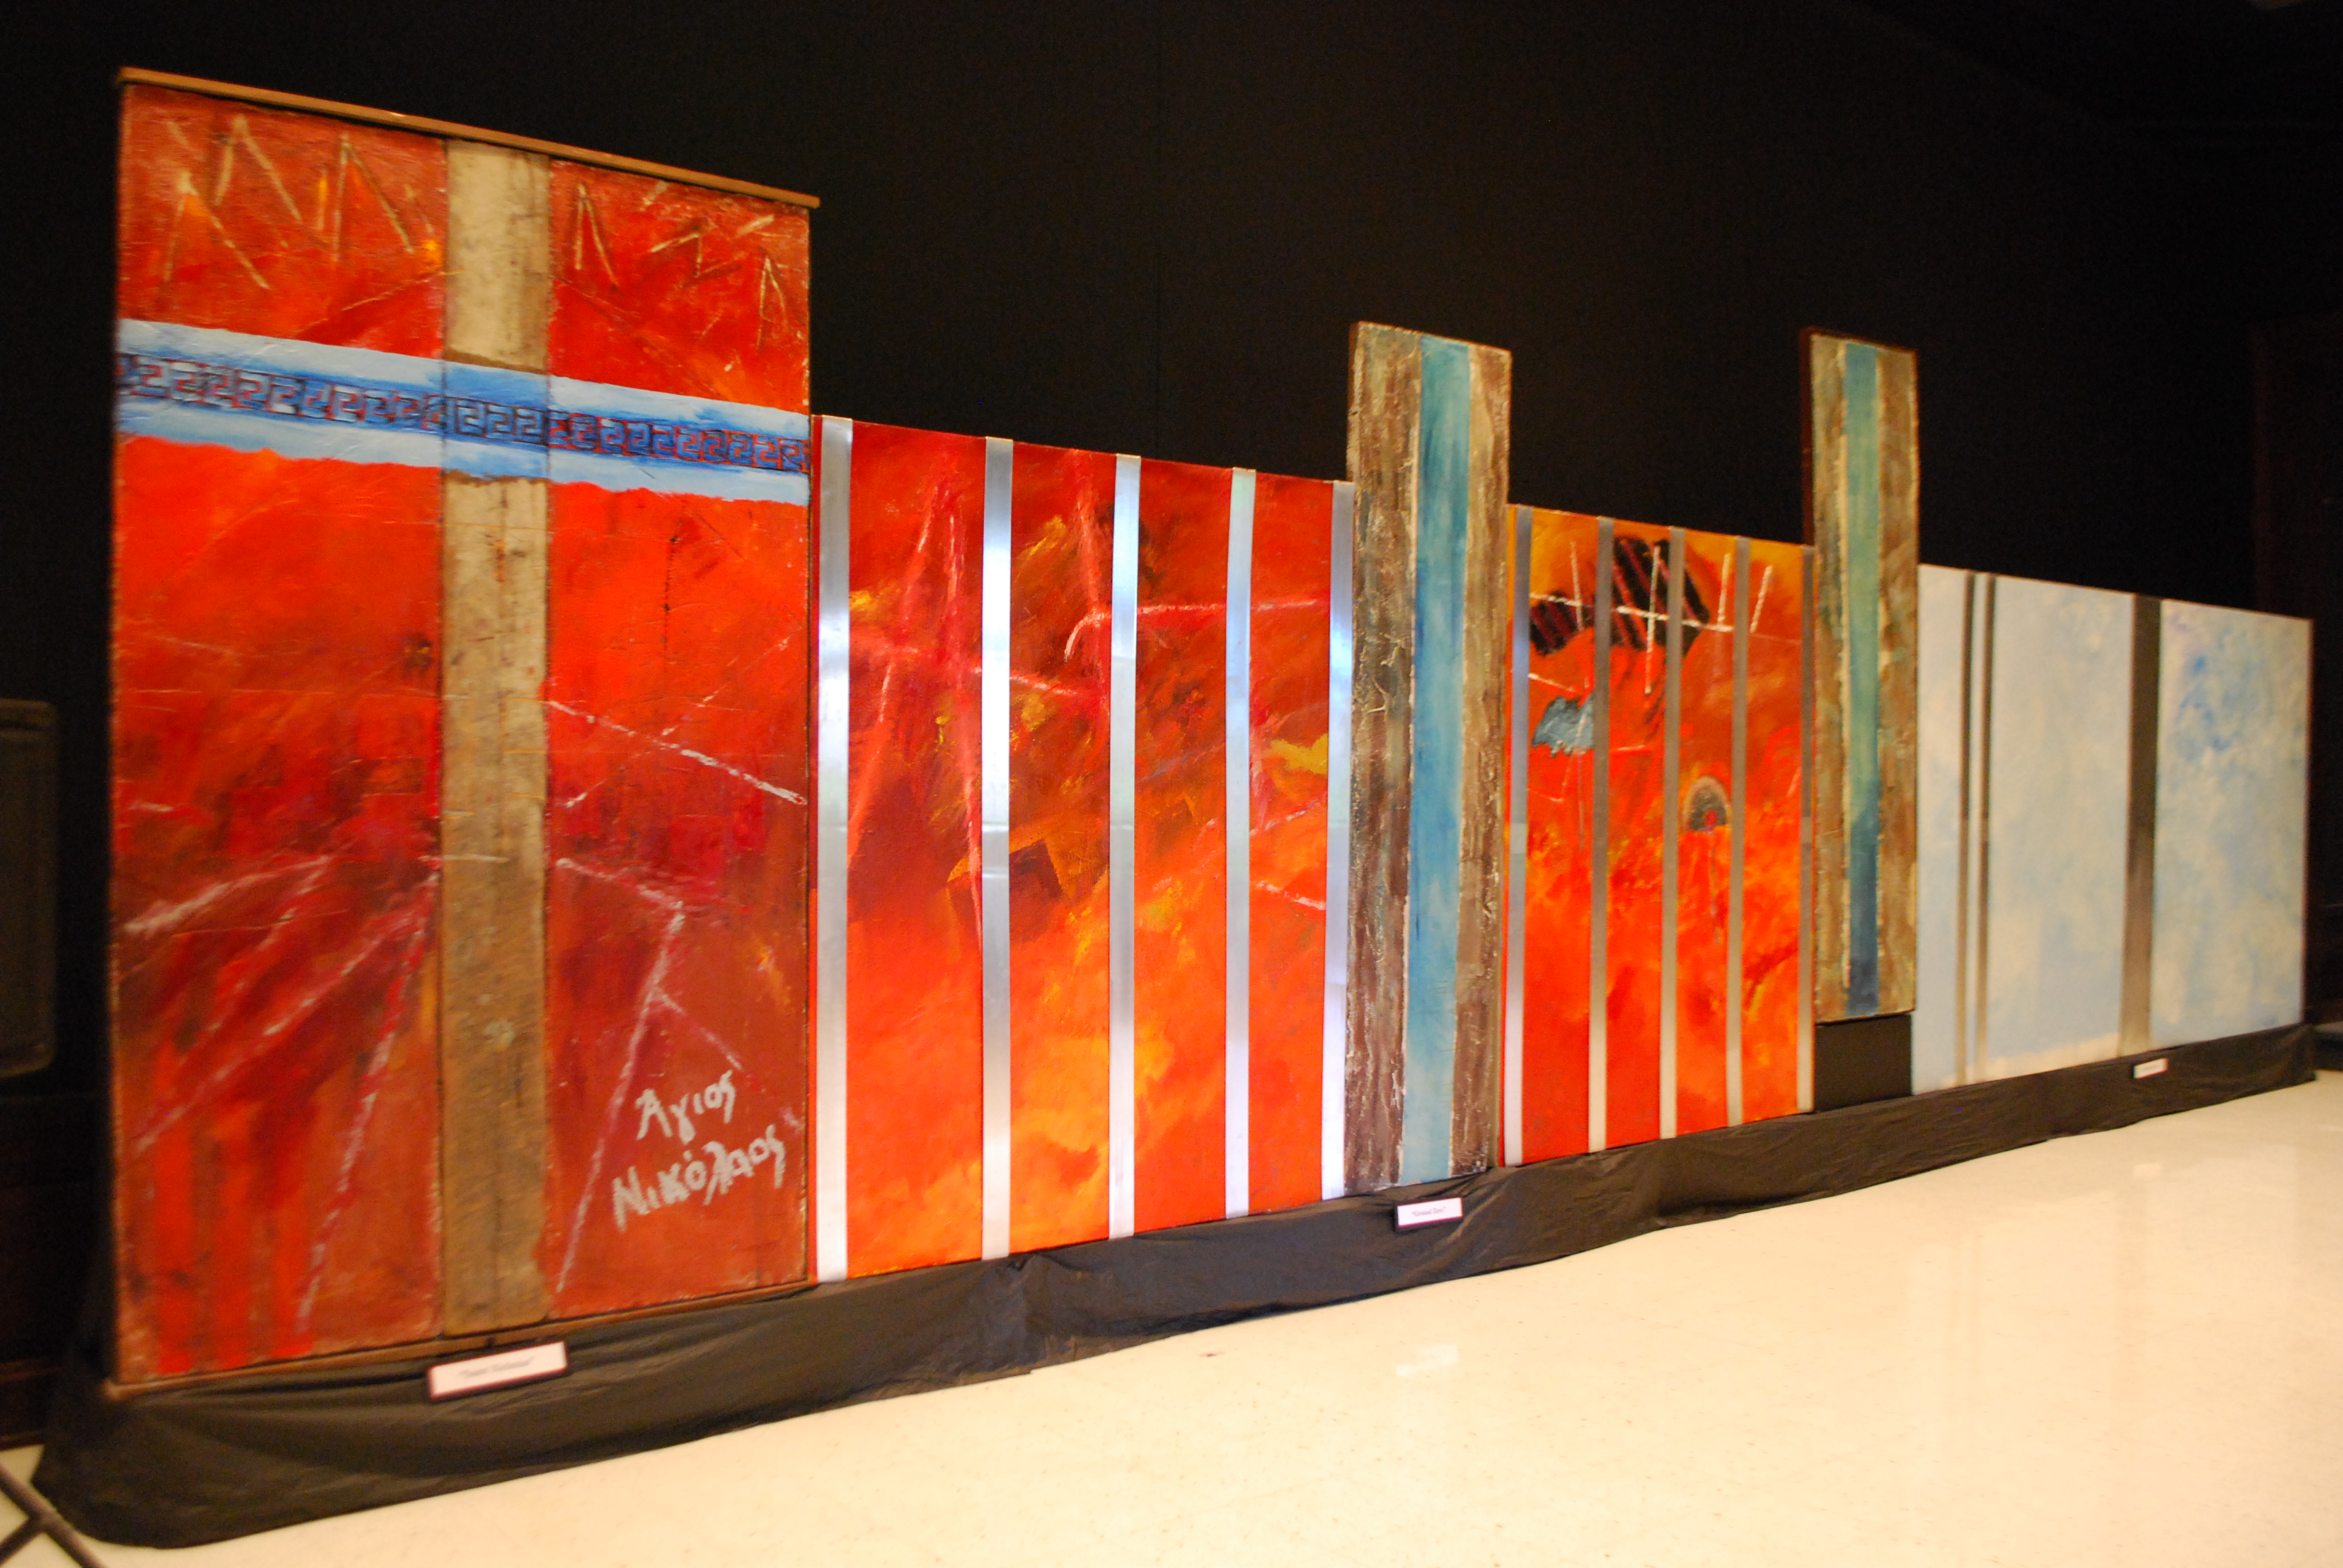 Long interconnected work with (l. to r.) Large wooden beam with crossing Greek key motif surrounded by brilliant red;  fiery red canvas panels with smaller forms, overlain by shiny metal laths; and two large abstract sections with white-obscured sky blue, overlain with metal laths.